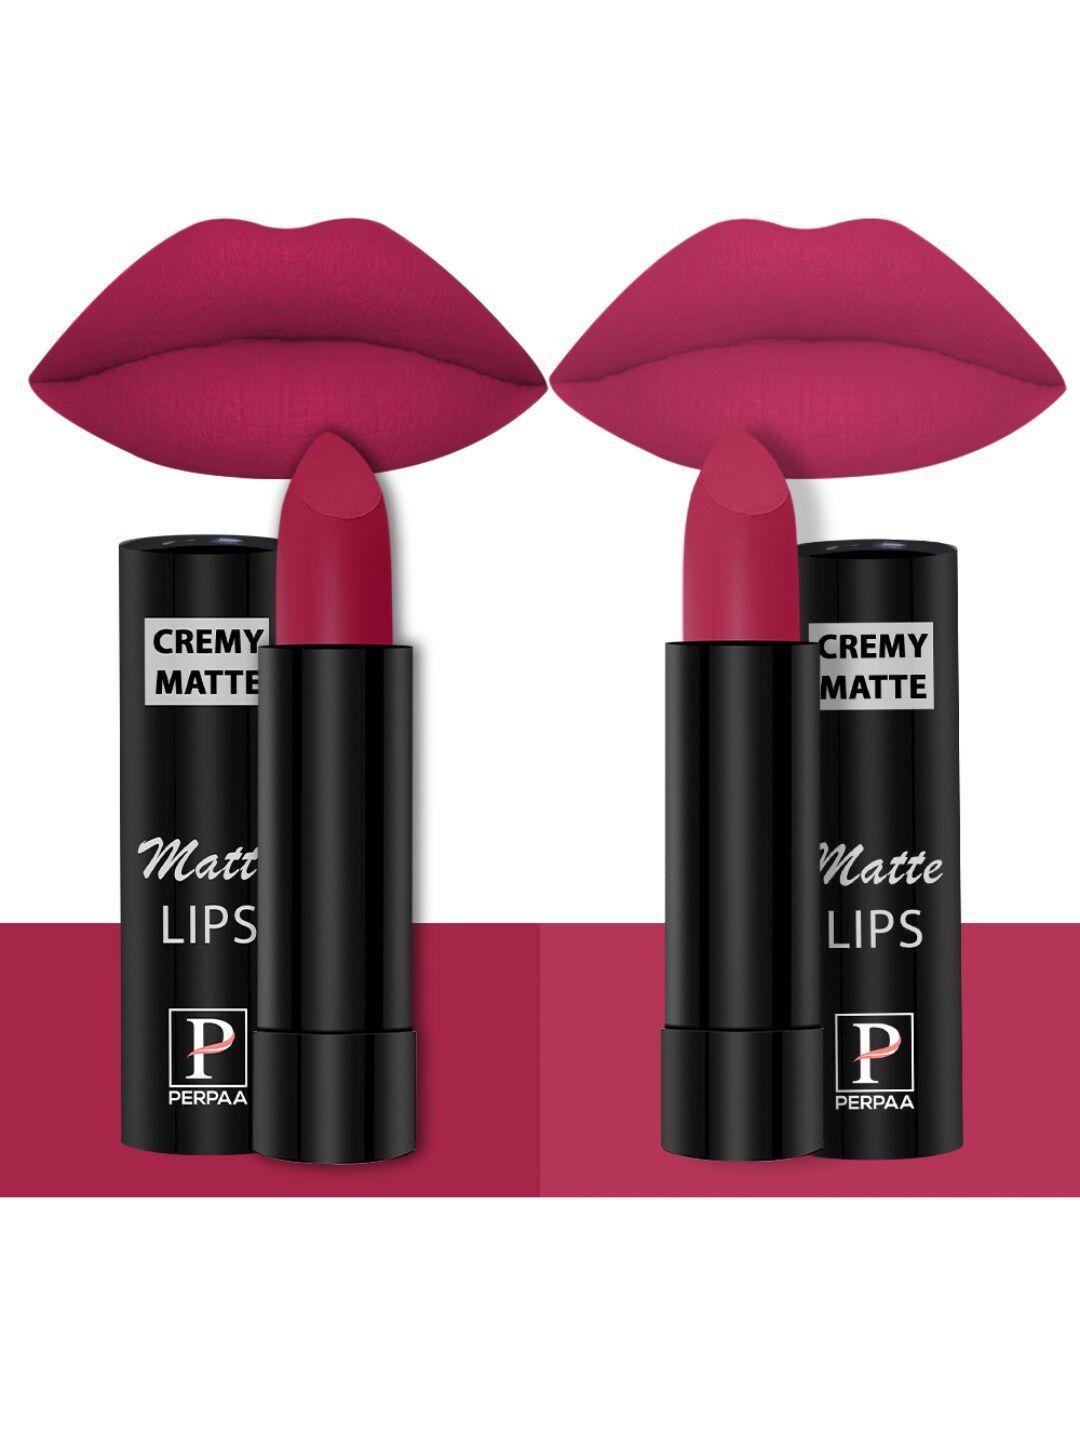 perpaa set of 2 creamy matte bullet lipstick 3.5g each-ruby magenta 84 & strawberry pink92